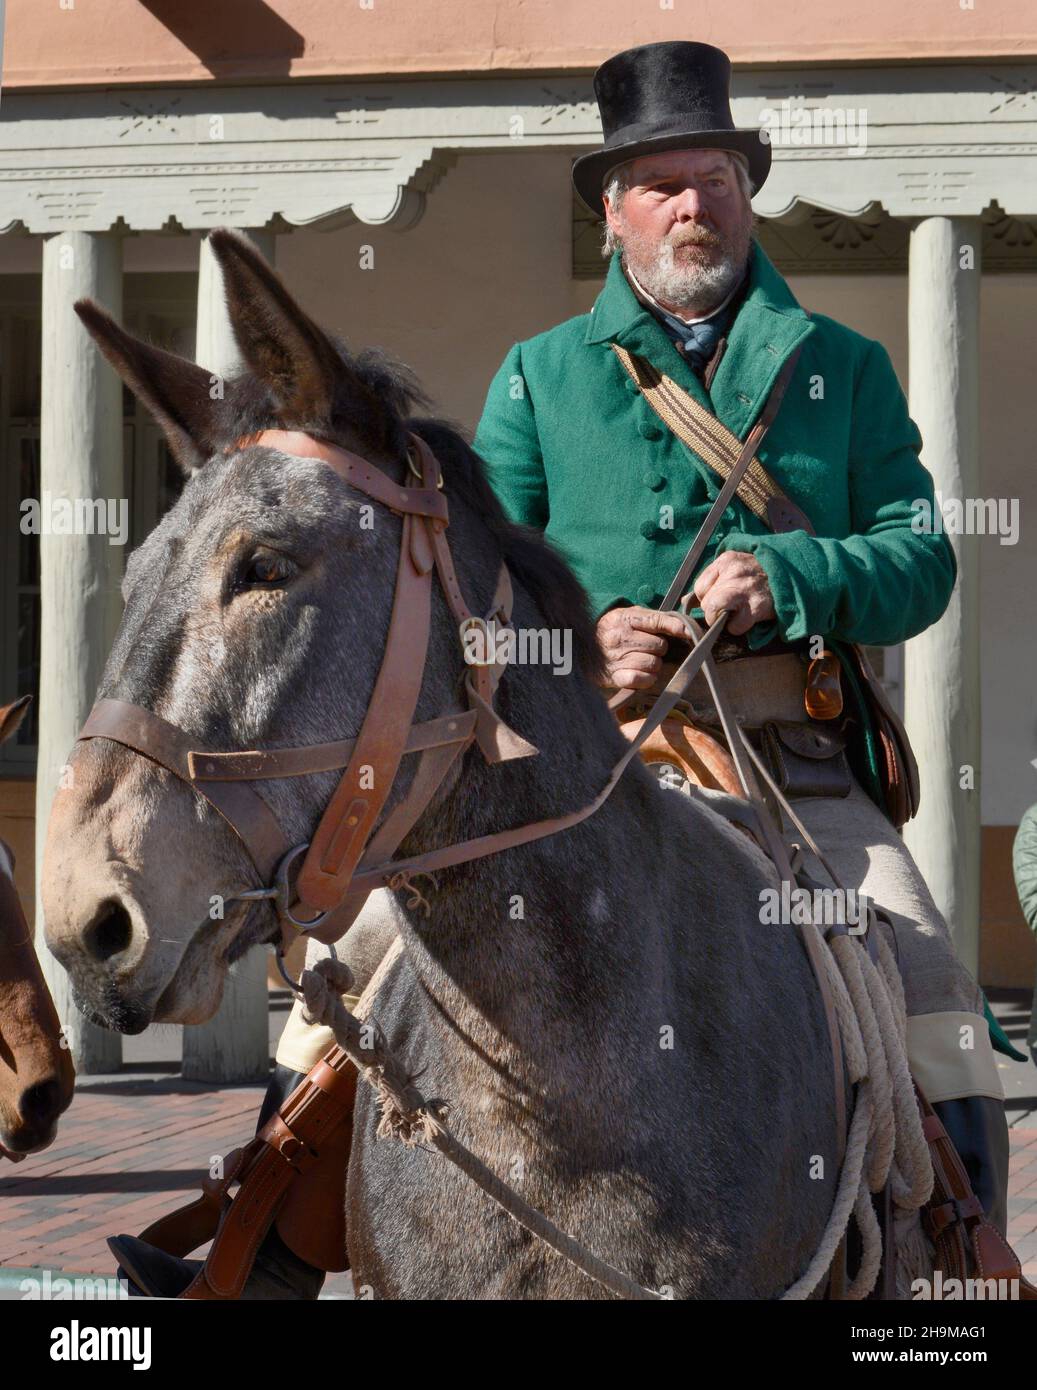 A reenactor portrays trailblazer William Becknell at a reenactment of the 1821 opening of the Santa Fe Trail in Santa Fe, New Mexico. Stock Photo